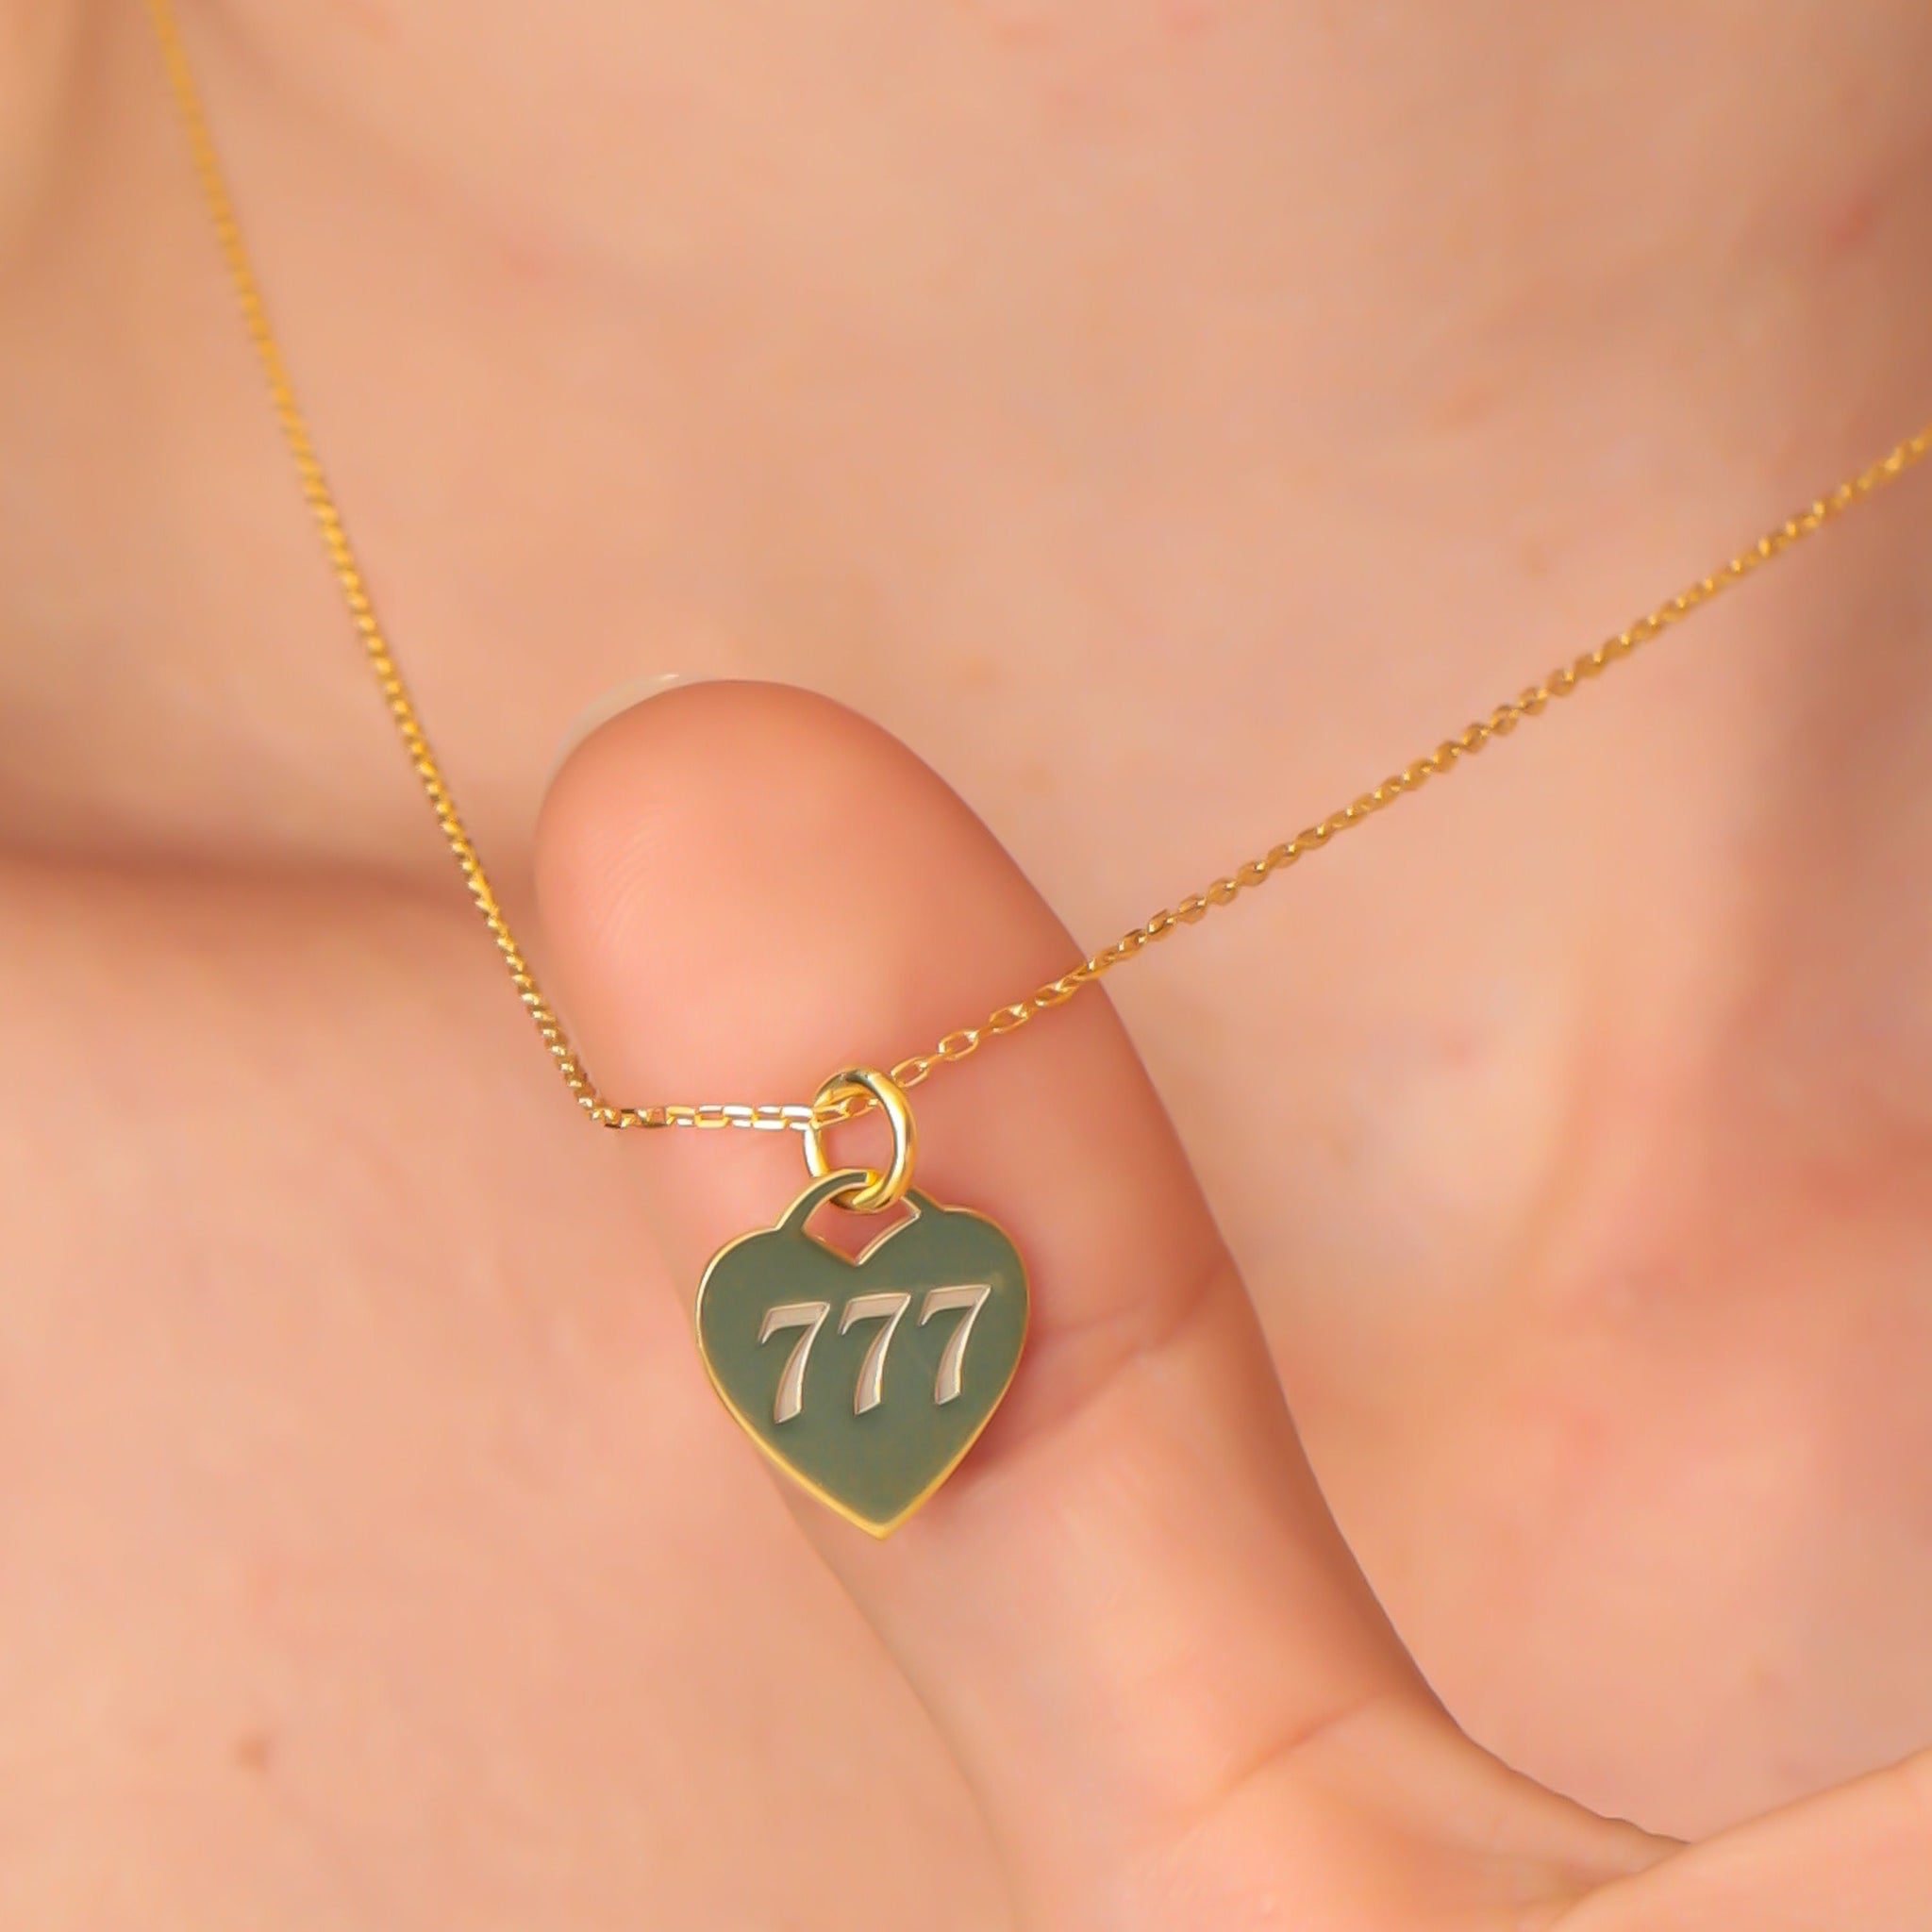 Personalized Heart Angel Number Necklace Gold Filled Angel Number Necklace 111 222 333 444 555 666 777 888 999 Silver Necklace